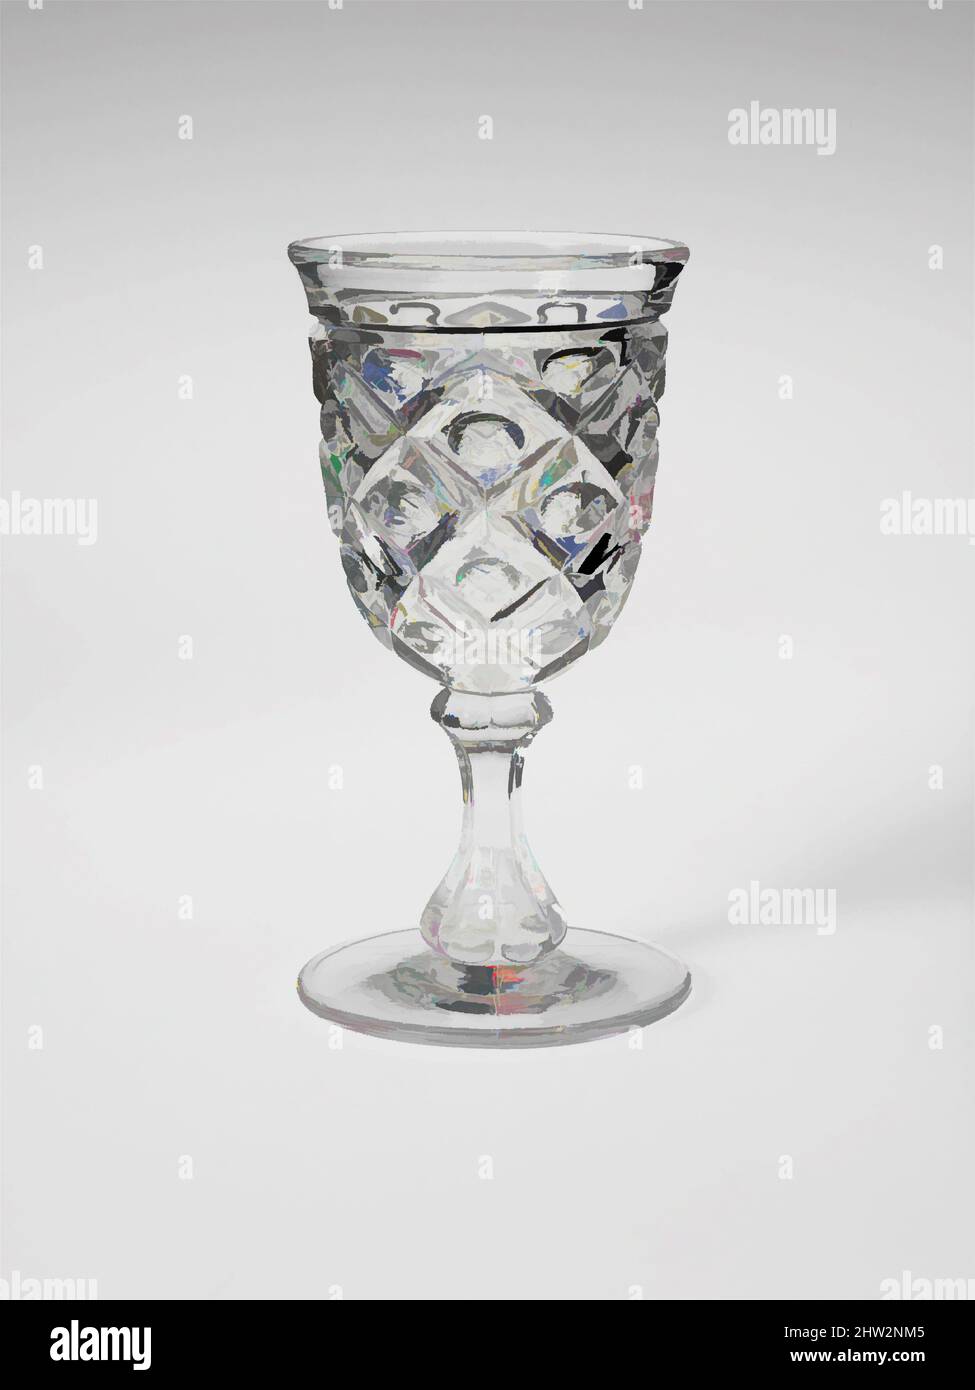 Art inspired by Goblet, 1850–60, Probably made in Pittsburgh, Pennsylvania, United States, American, Pressed glass, diamond thumbprint, Glass, With the development of new formulas and techniques, glass-pressing technology had improved markedly by the late 1840s. By this time, pressed, Classic works modernized by Artotop with a splash of modernity. Shapes, color and value, eye-catching visual impact on art. Emotions through freedom of artworks in a contemporary way. A timeless message pursuing a wildly creative new direction. Artists turning to the digital medium and creating the Artotop NFT Stock Photo